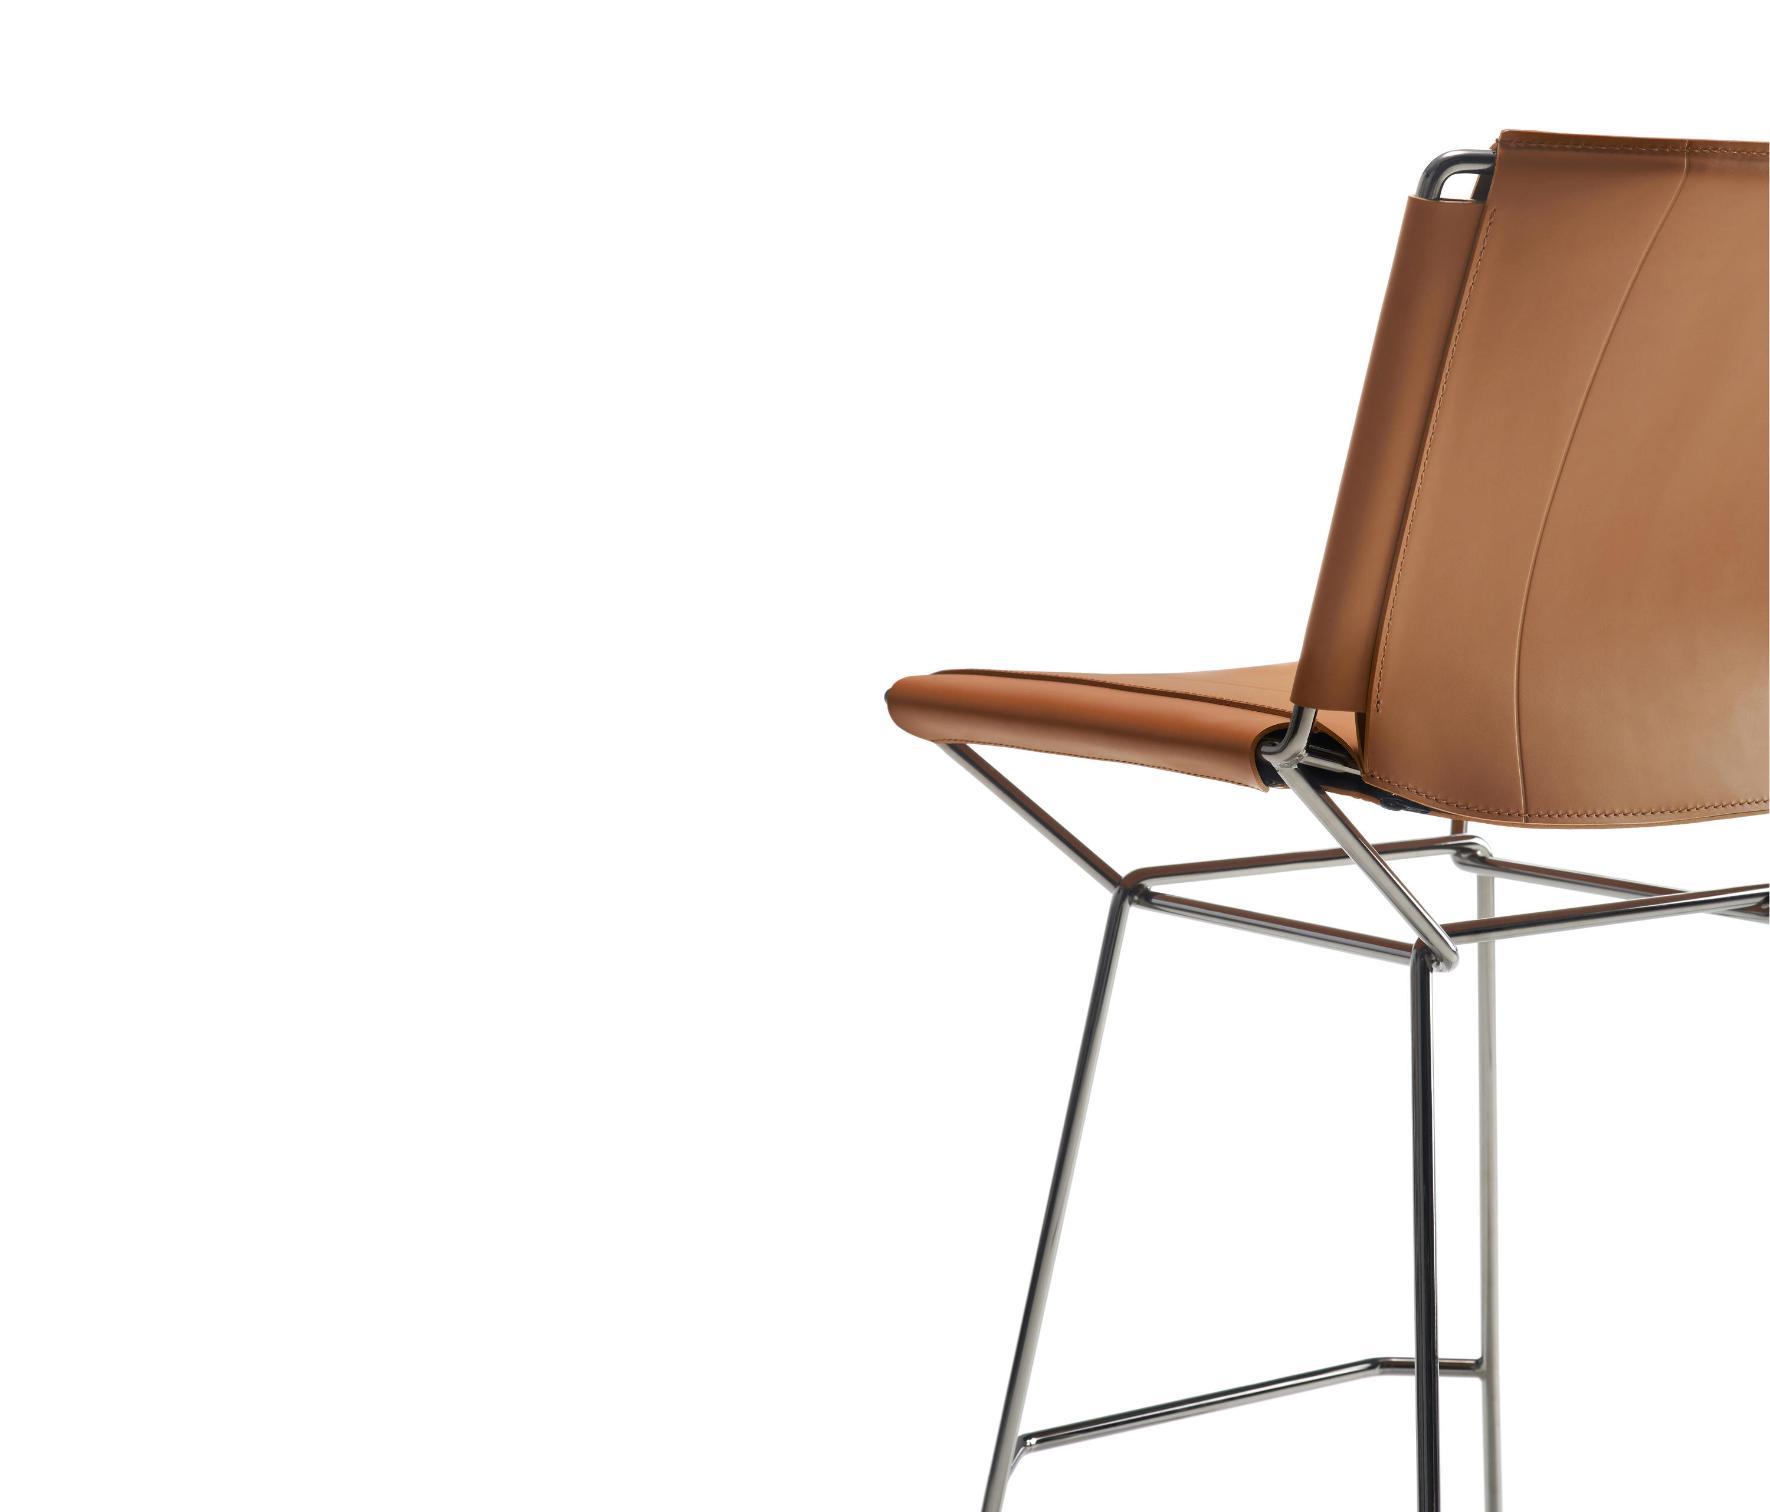 Neil Leather Stool ☞ Colour: Turtledove R906 Col. 29 ☞ Dimensions: Height 96 cm